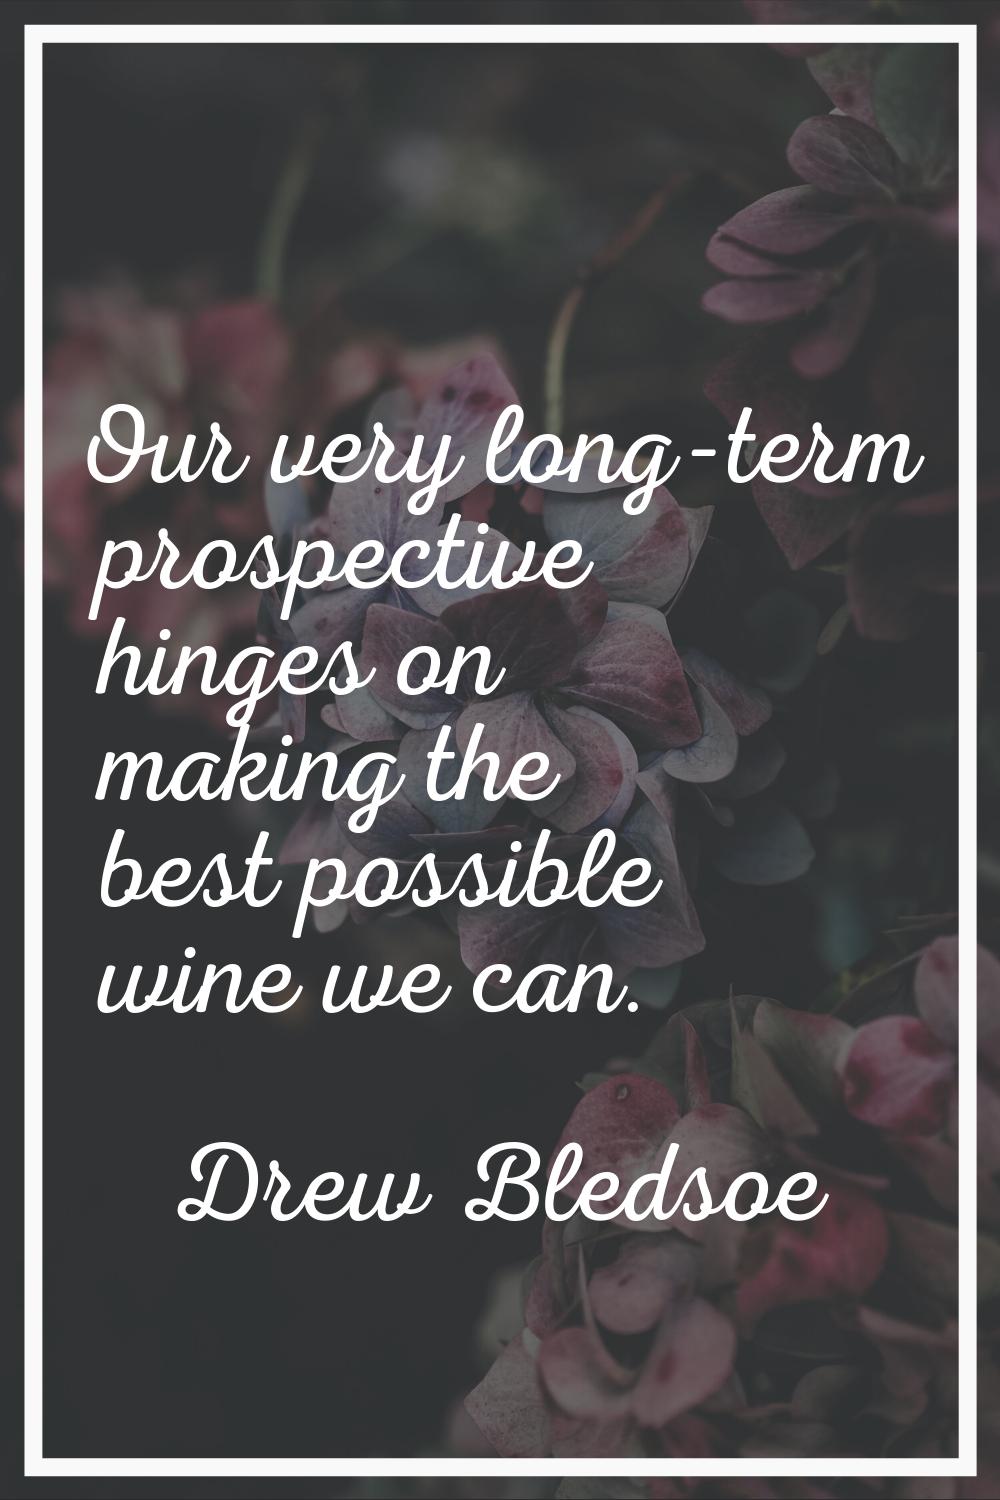 Our very long-term prospective hinges on making the best possible wine we can.